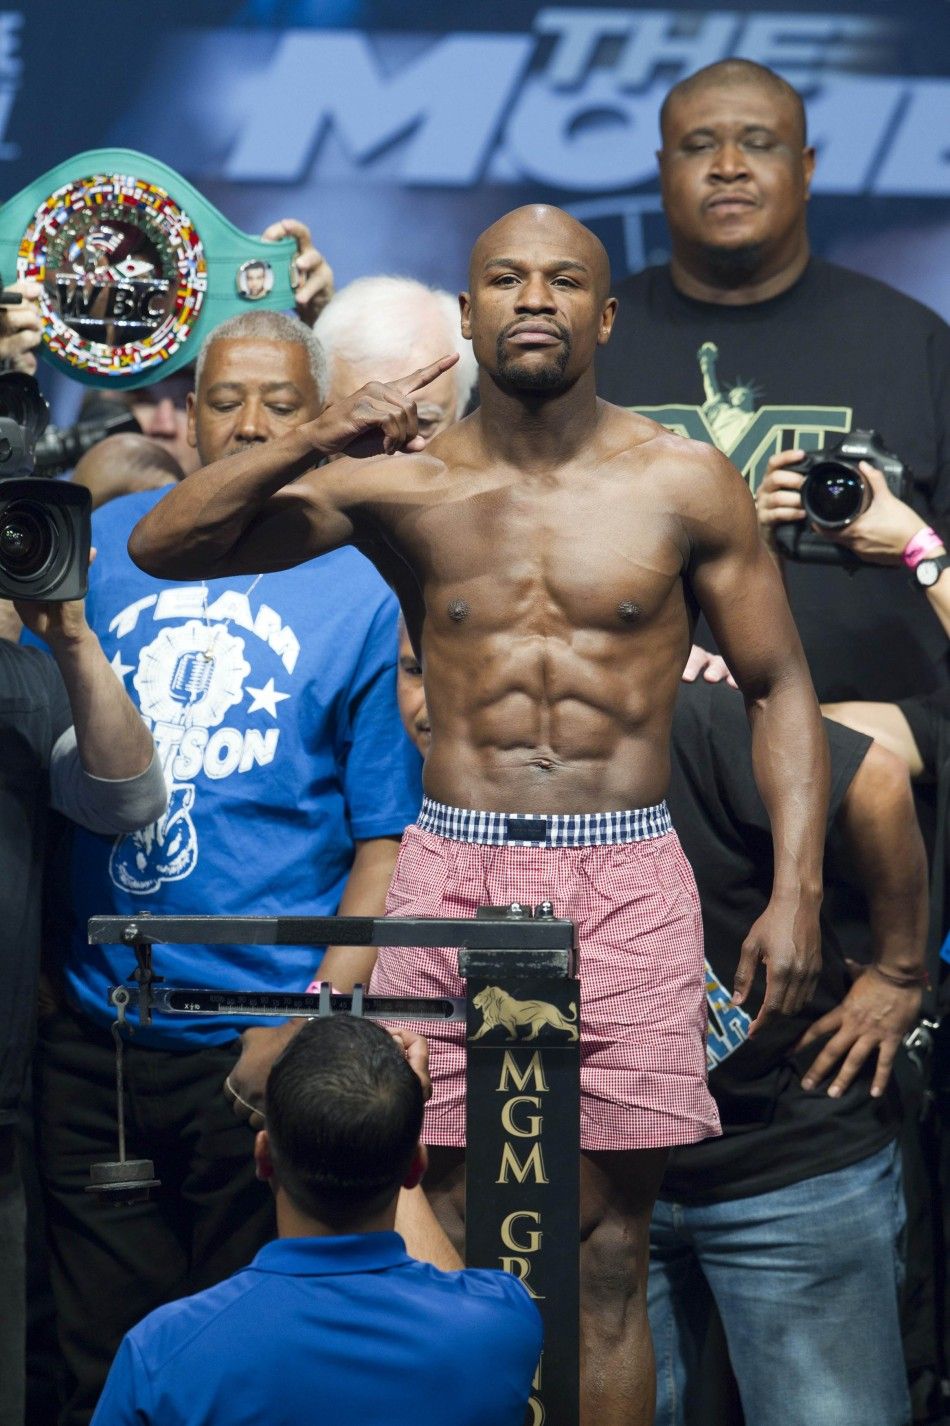 WBC welterweight champion Floyd Mayweather Jr. of the U.S. poses on the scale during an official weigh-in at the MGM Grand Garden Arena in Las Vegas, Nevada, May 2, 2014. Mayweather faces WBA welterweight champion Marcos Maidana of Argentina in a WBCWBA 